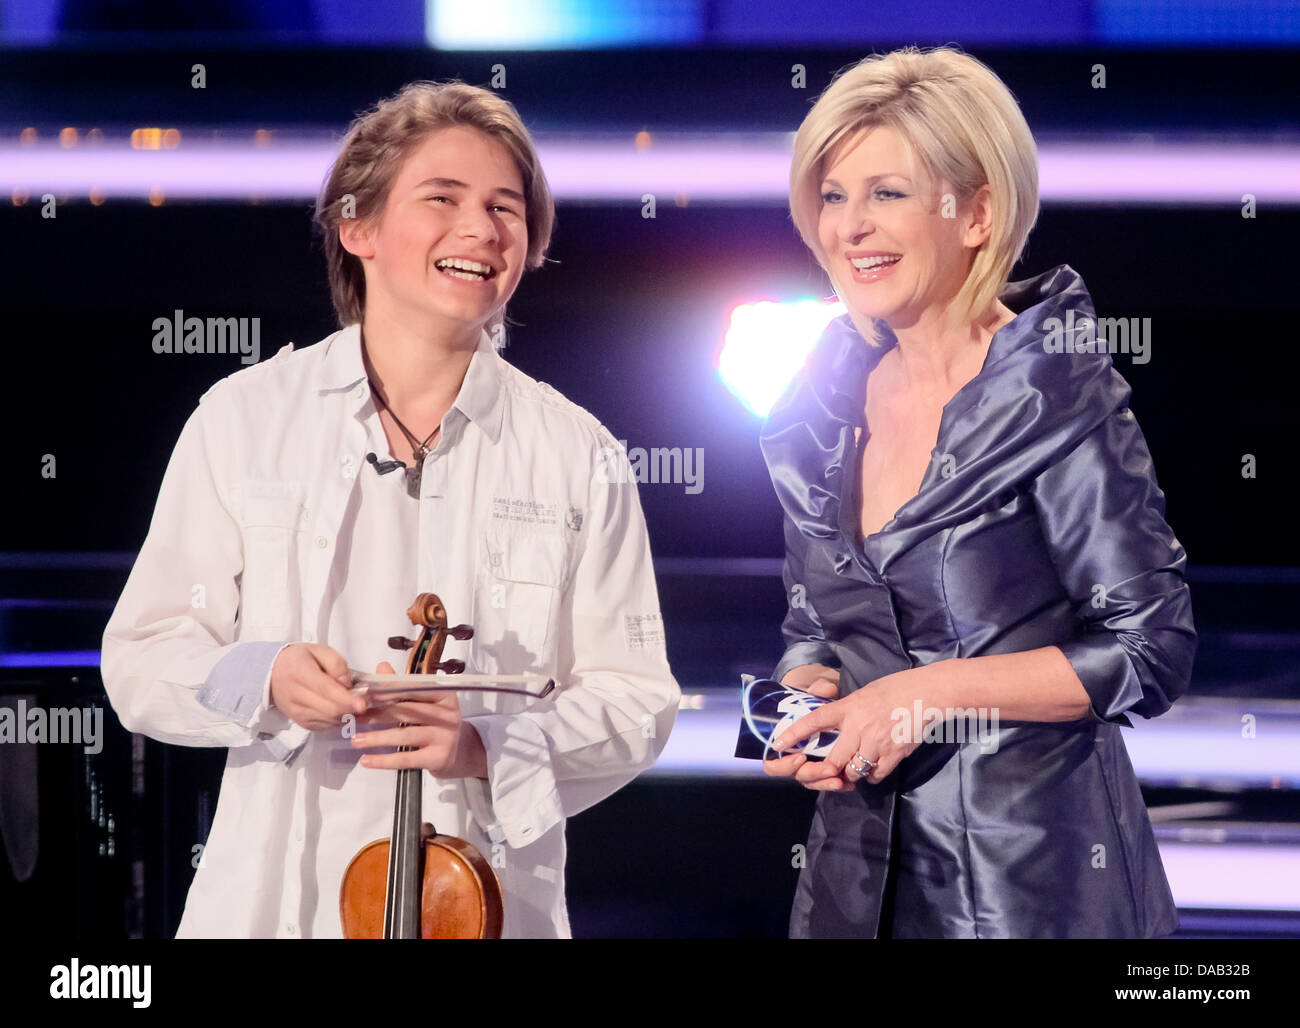 Television presenter Carmen Nebel (R) and young German violinist Elin Kolev during the live broadcast of the German television show  'Willkommen bei Carmen Nebel' (Welcome to Carmen Nebel) at the Getec-Arena in Magdeburg, Germany, 24 September 2011.     Photo: Andreas Lander Stock Photo